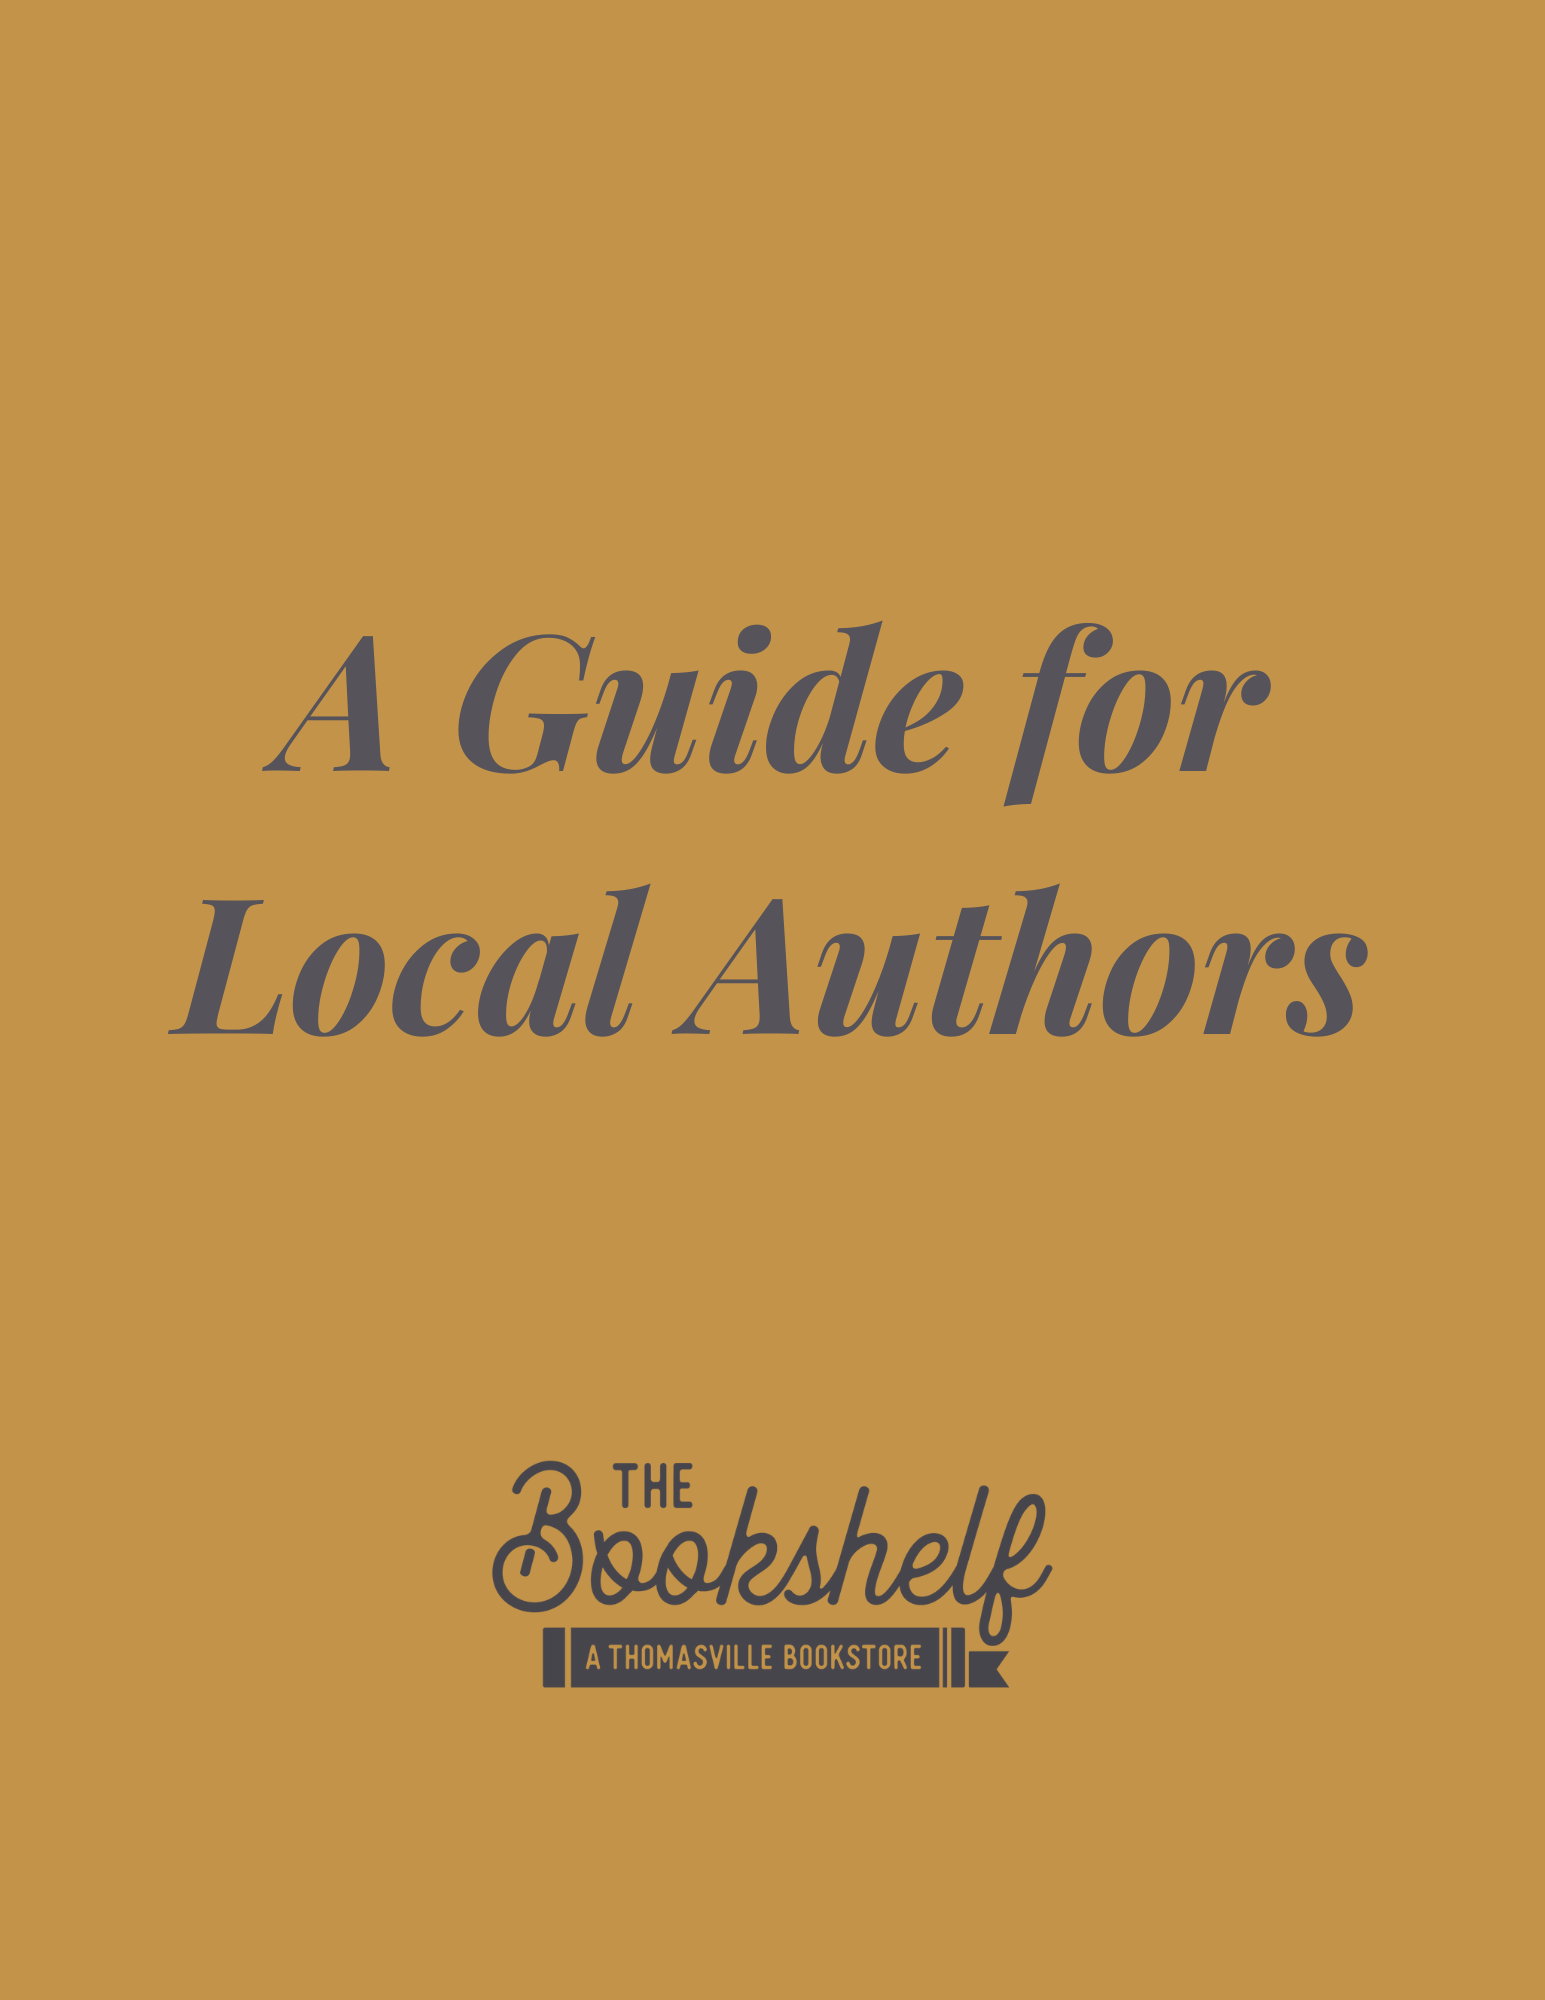 A Guide for Local Authors